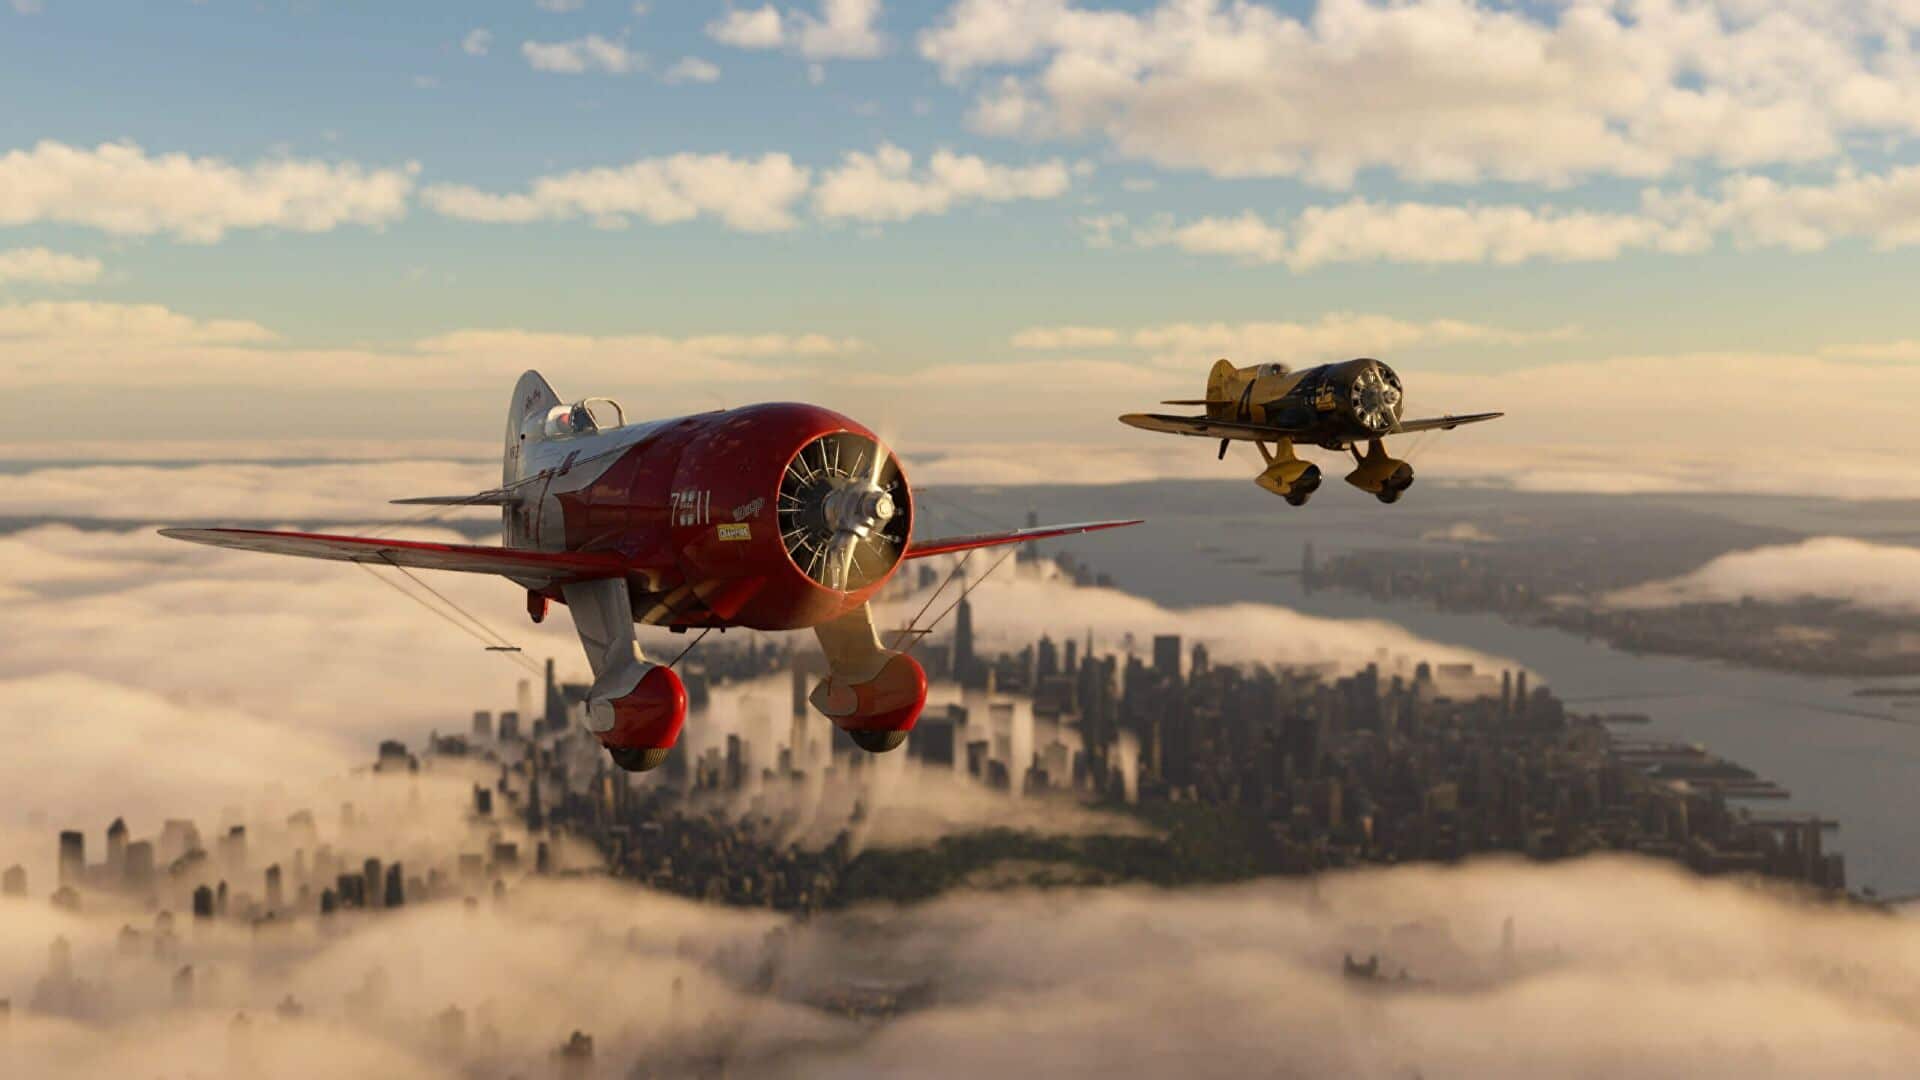 Microsoft Flight Simulator's 1930s air-racers let you pretend there's a new Crimson Skies